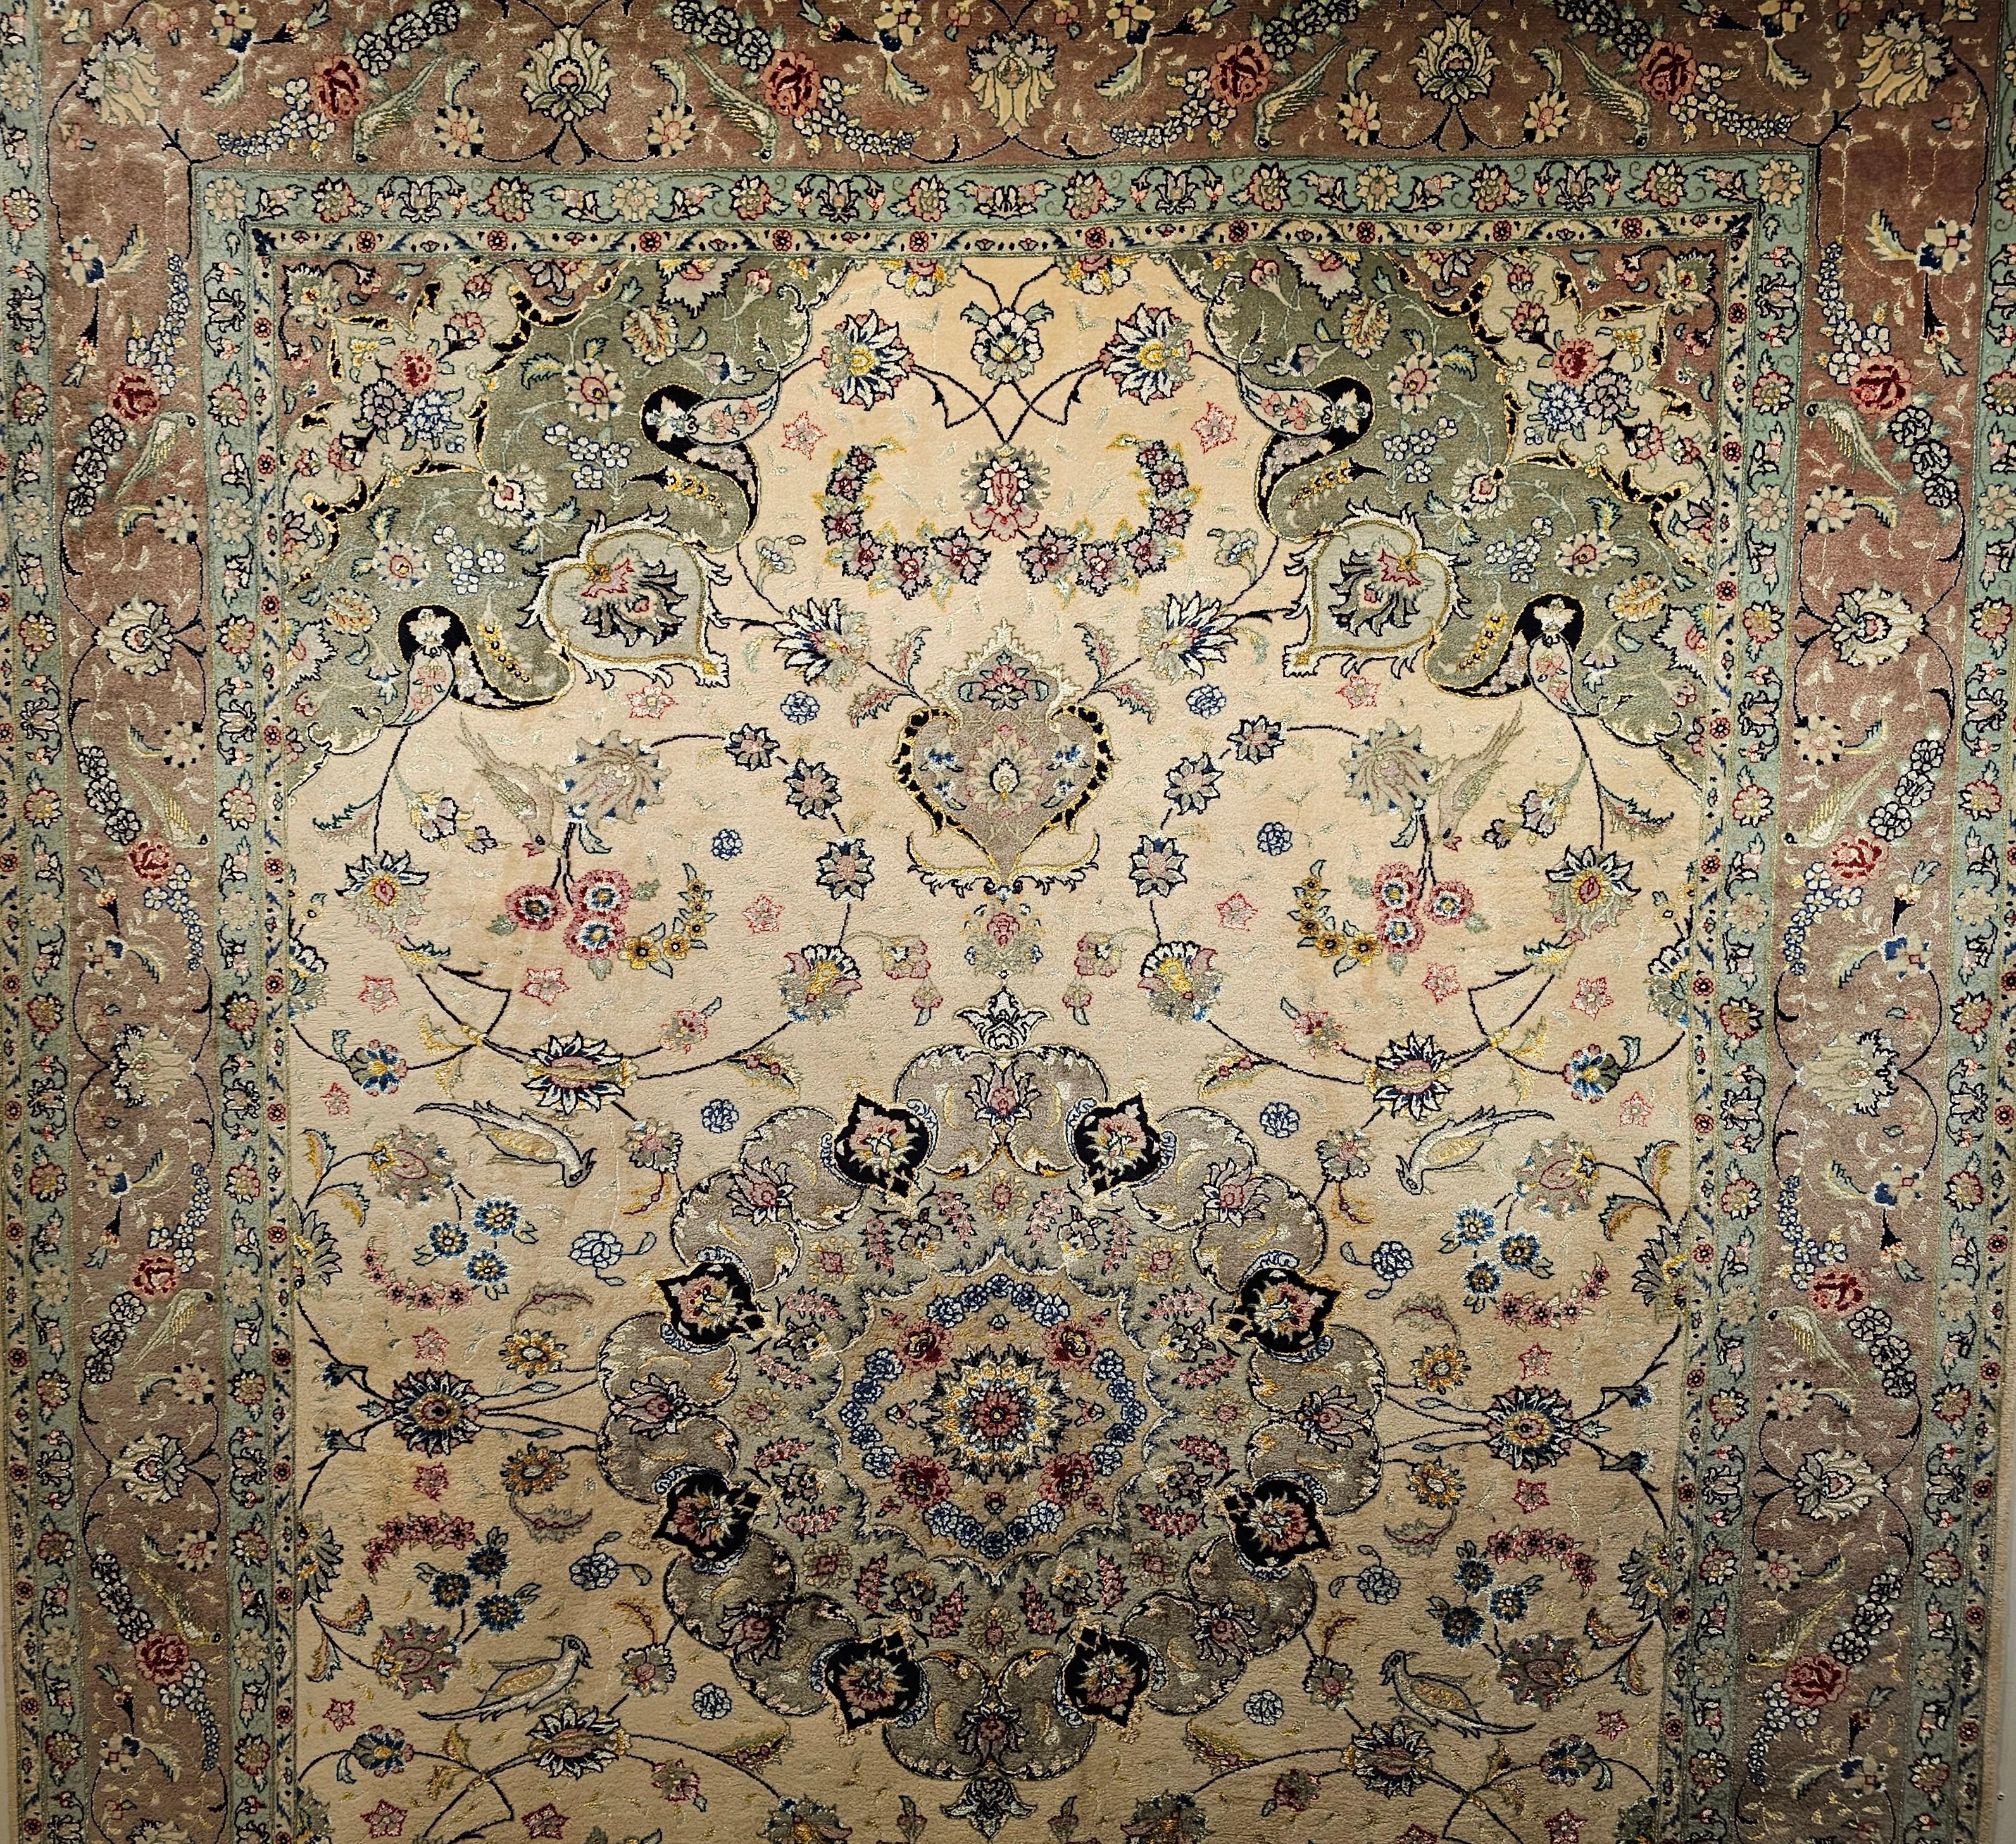 A very fine weave vintage Persian Tabriz room size rug in a floral design with silk highlights in ivory, taupe, and sage green colors from the 4th quarter of the 1900s.  The beautiful Tabriz rug  was very finely woven in a renowned workshop known